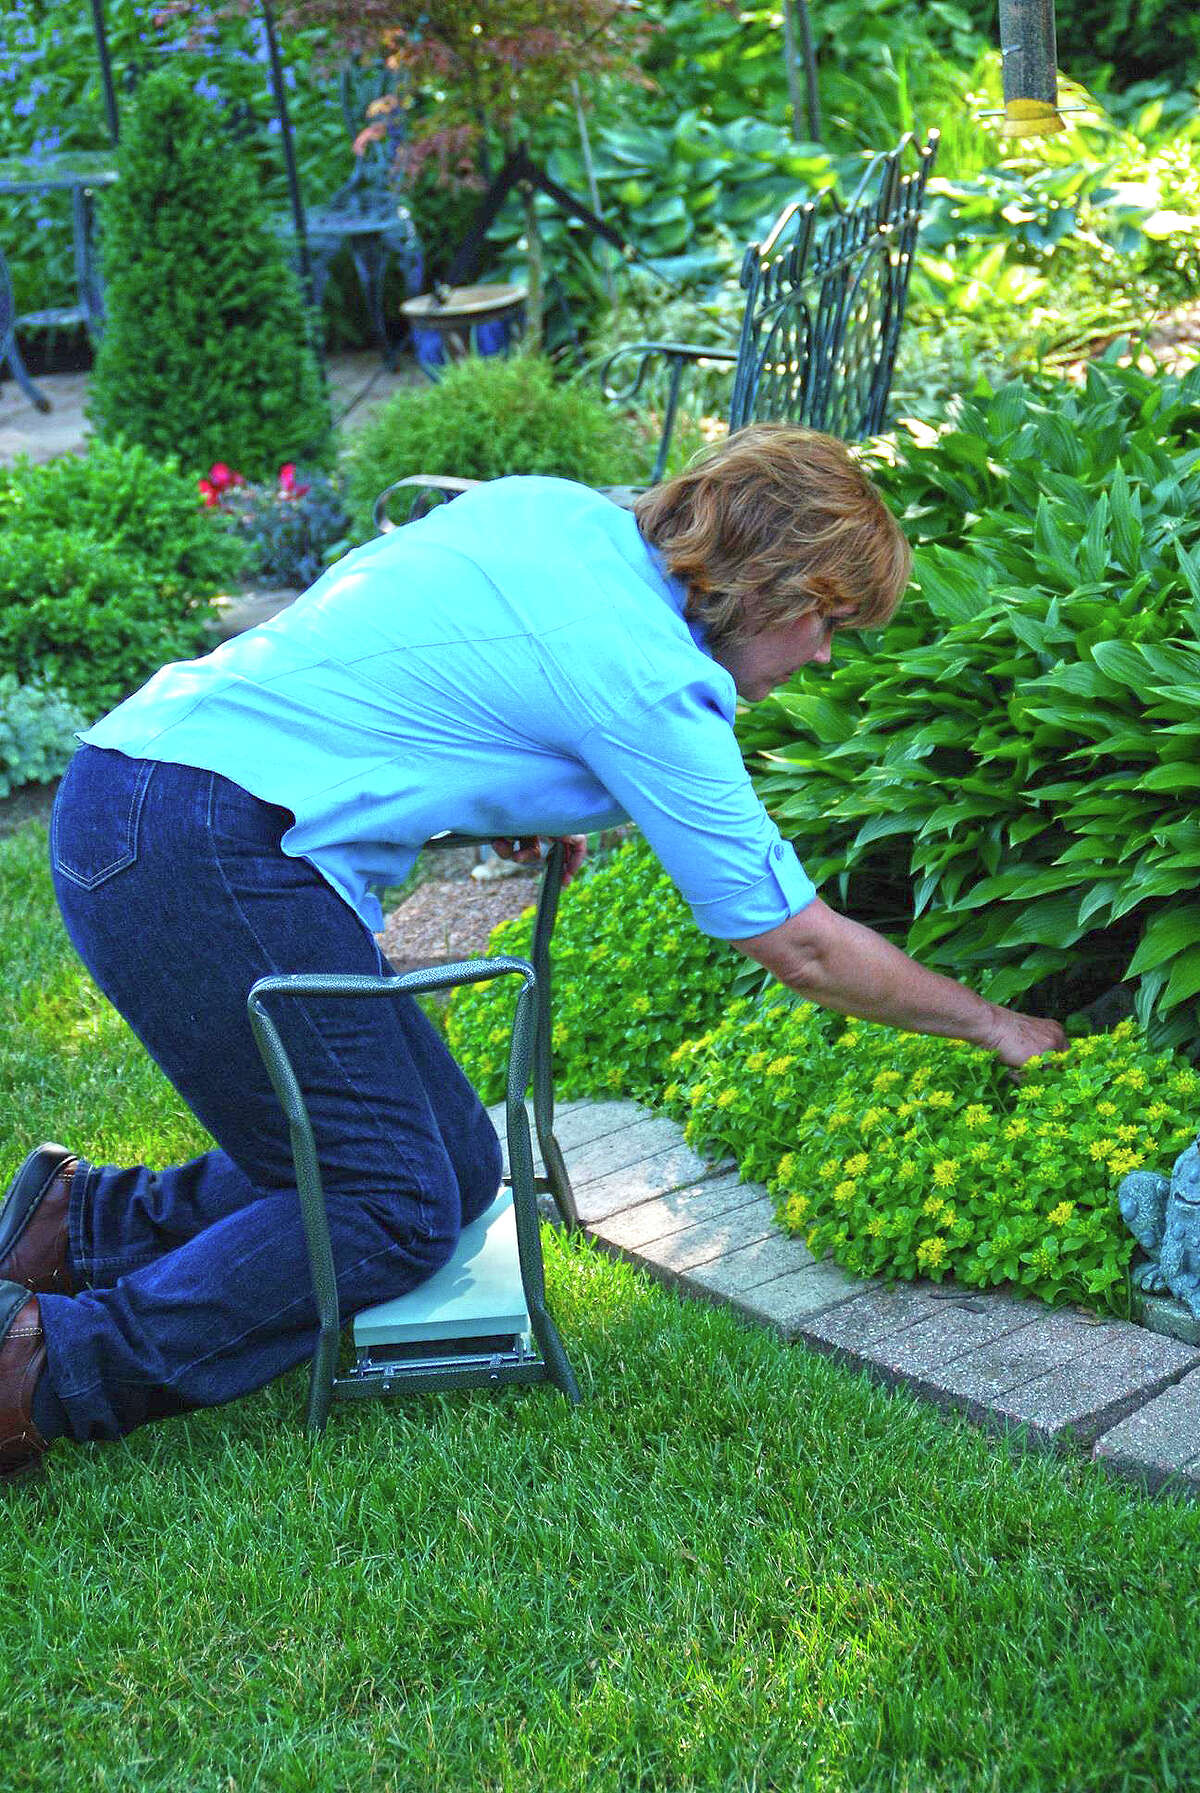 Kneelers with built-in handles can make moving up and down easier, protect joints and allow people to garden longer.